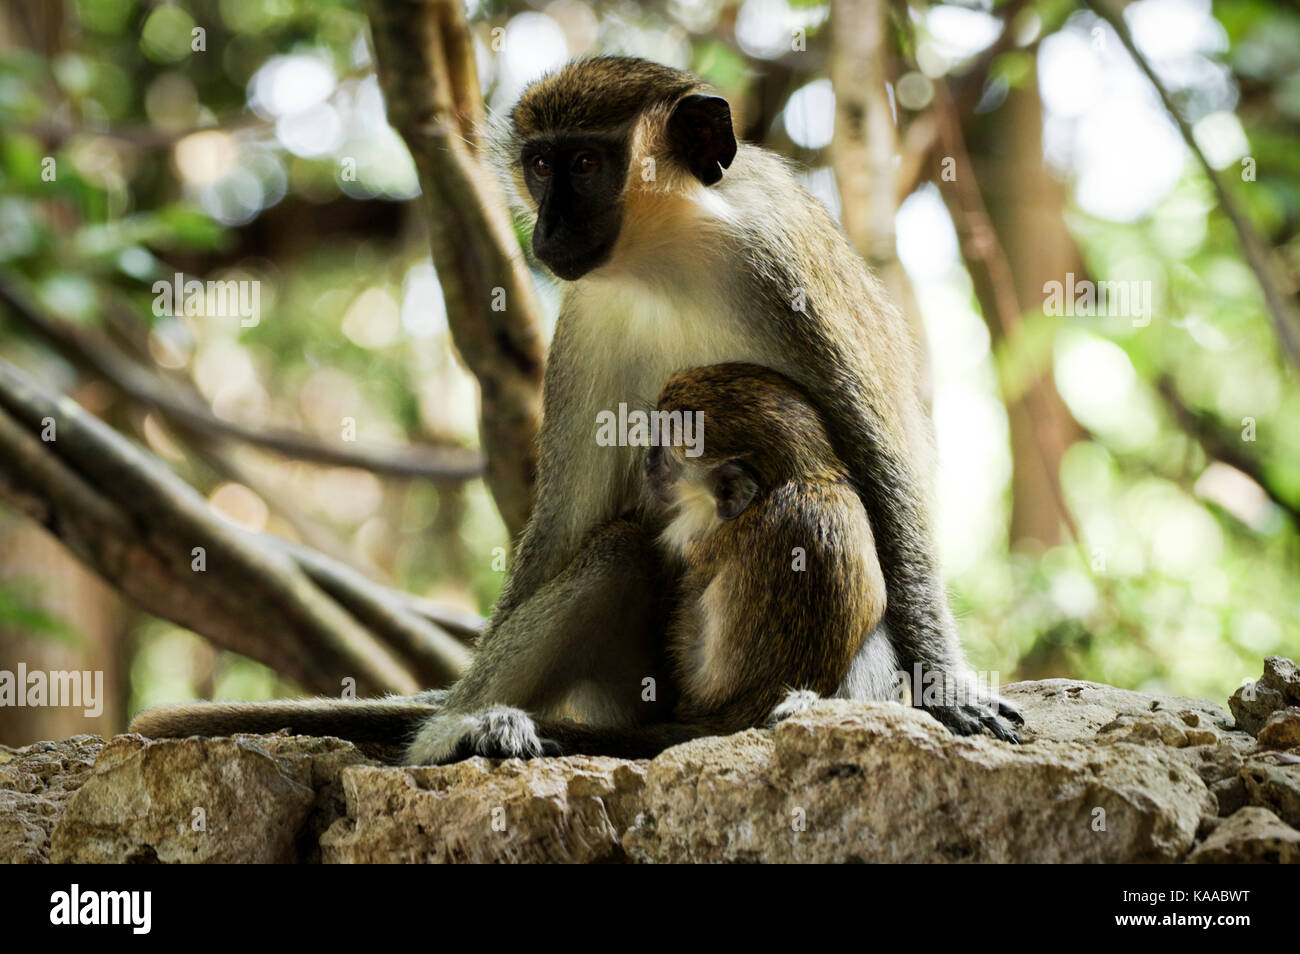 Adult Bajan green monkey with infant holding on - Barbados Stock Photo